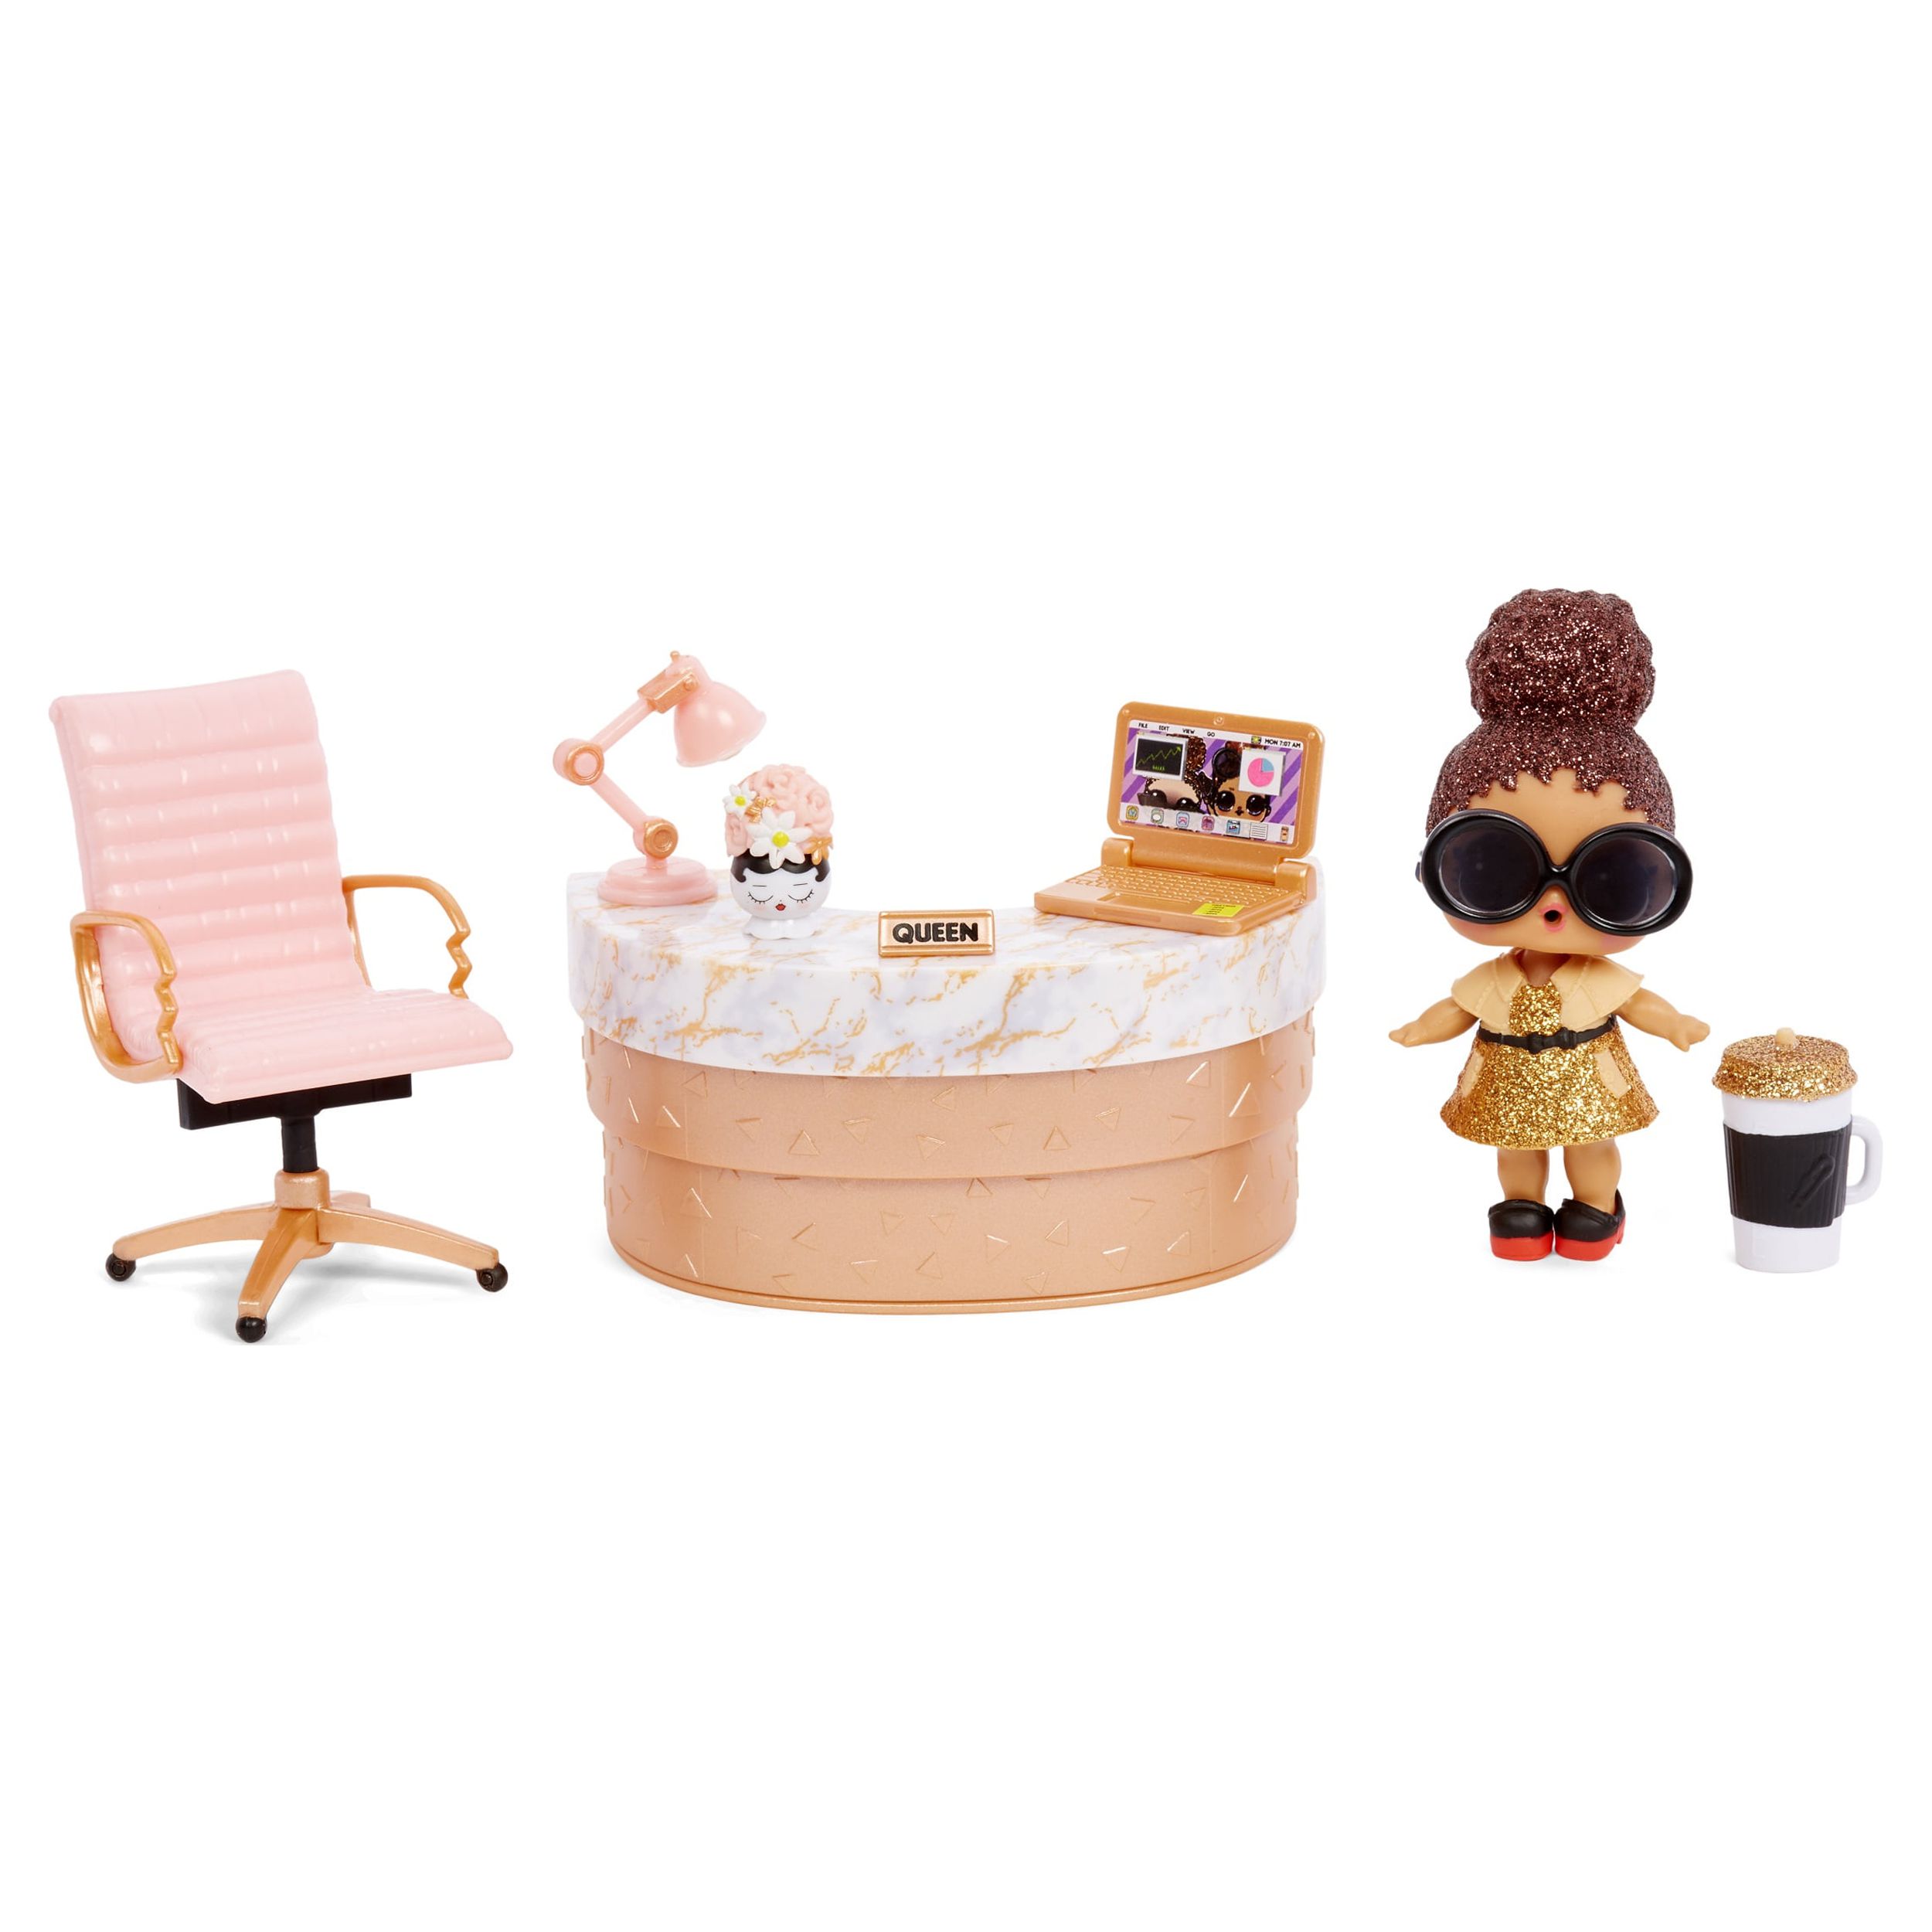 LOL Surprise Furniture School Office With Boss Queen & 10+ Surprises, Great Gift for Kids Ages 4+ - image 1 of 7